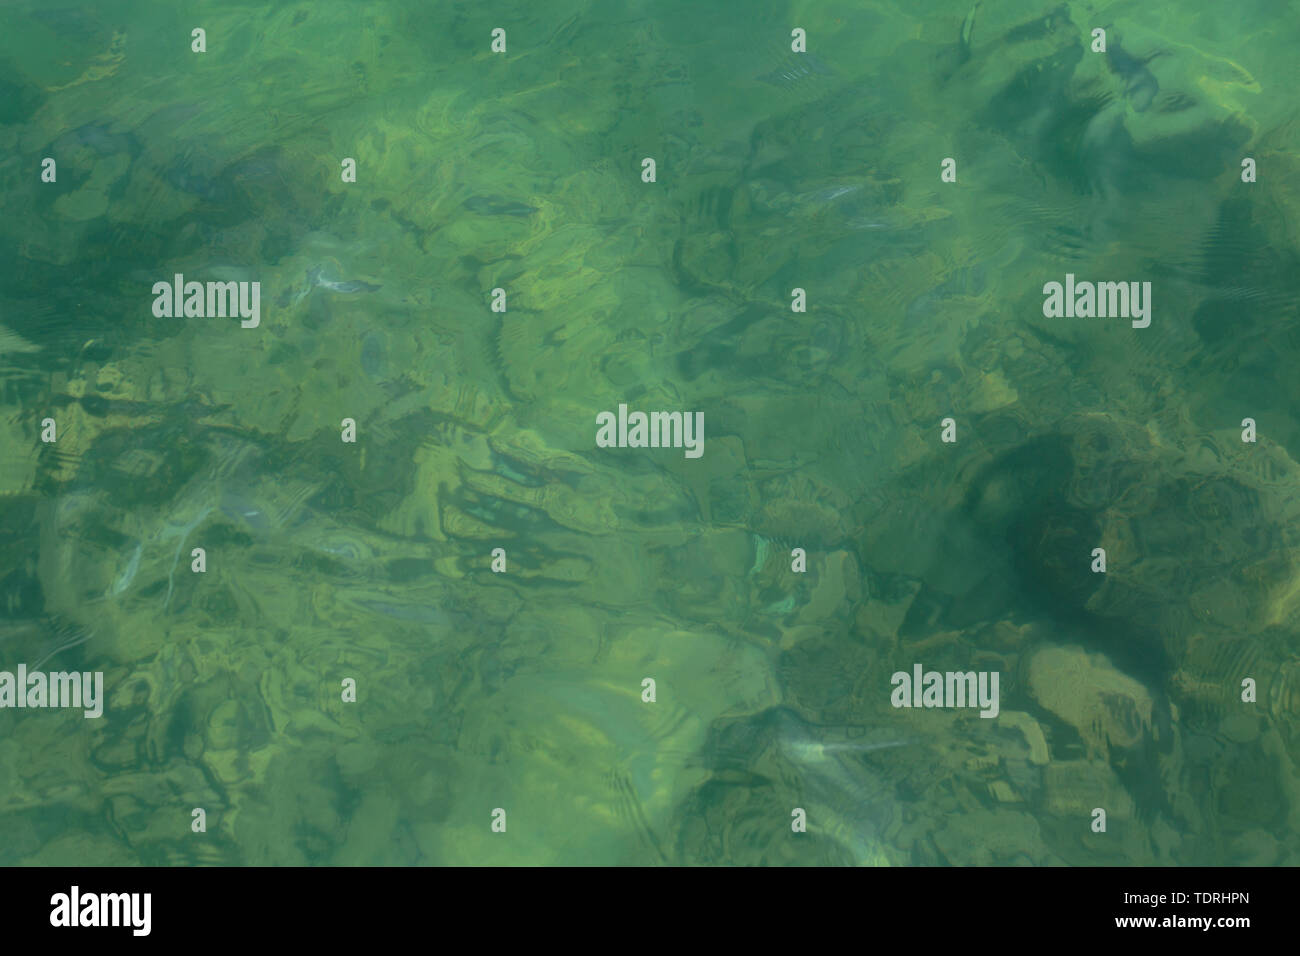 water on a background of green silt Stock Photo